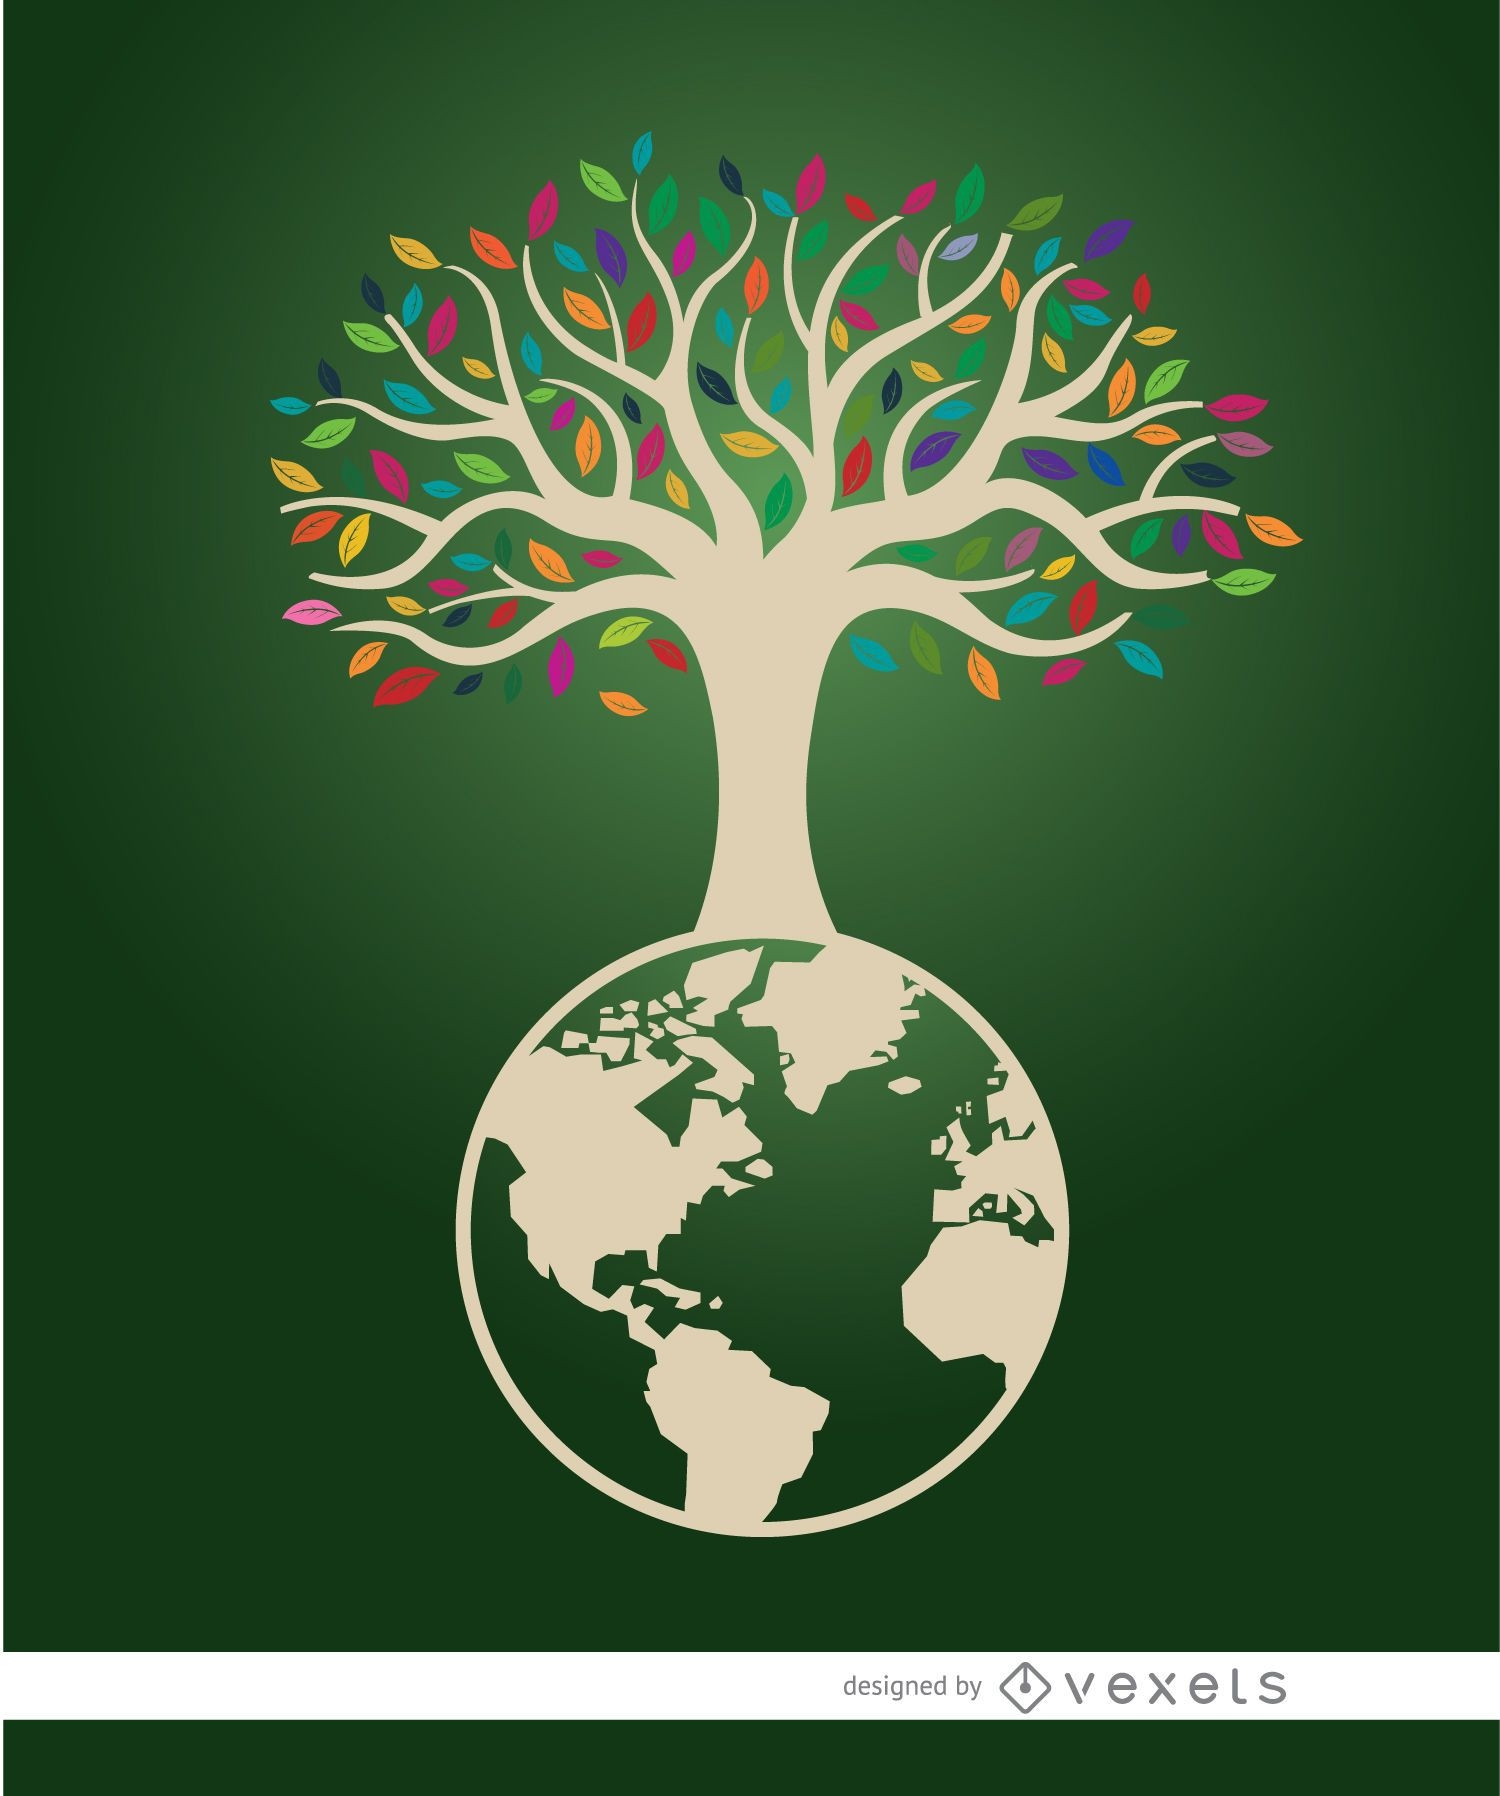 Earth tree ecologic poster